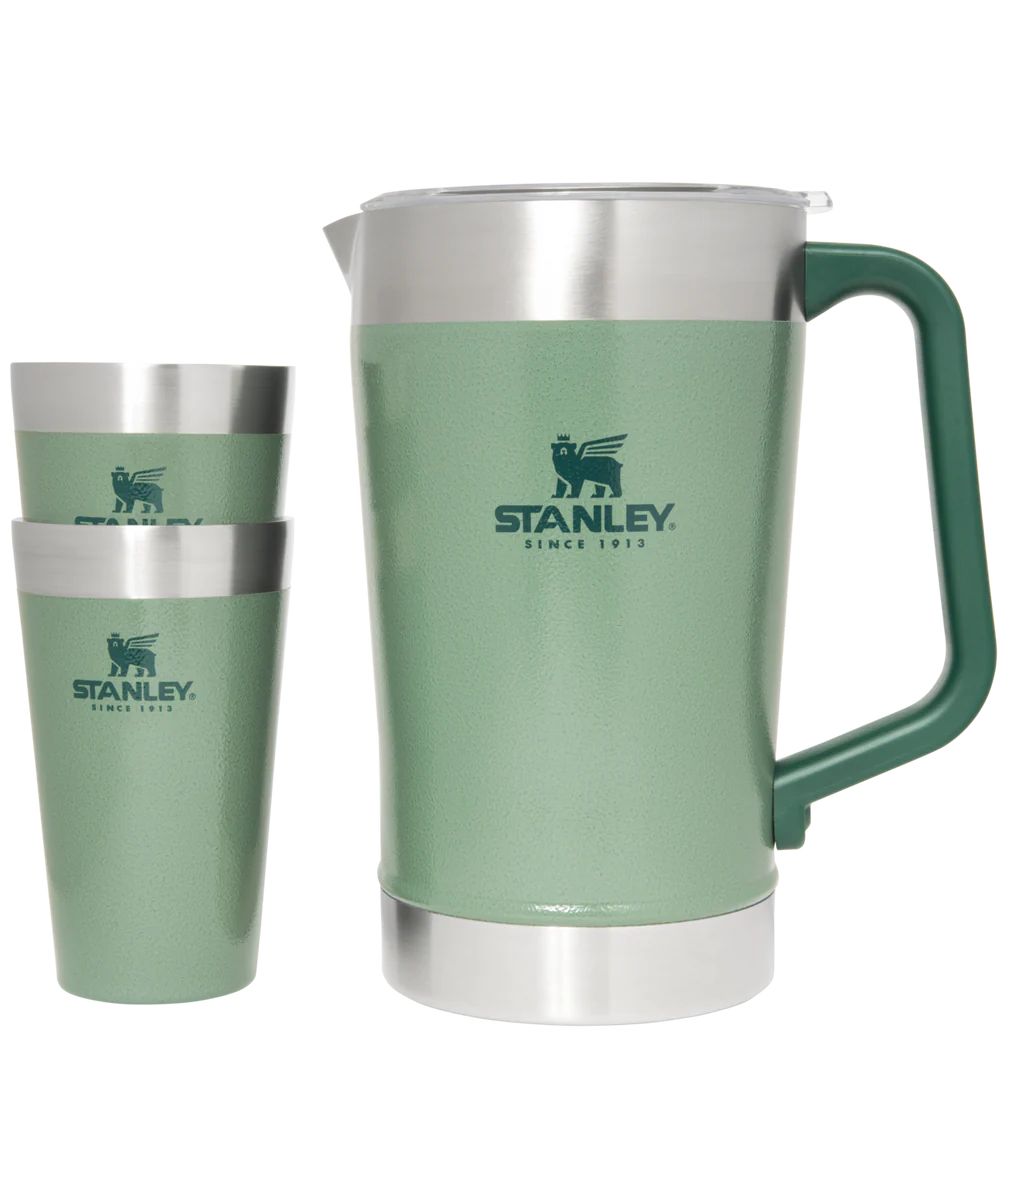 Classic Stay Chill Pitcher Set | Stanley PMI US